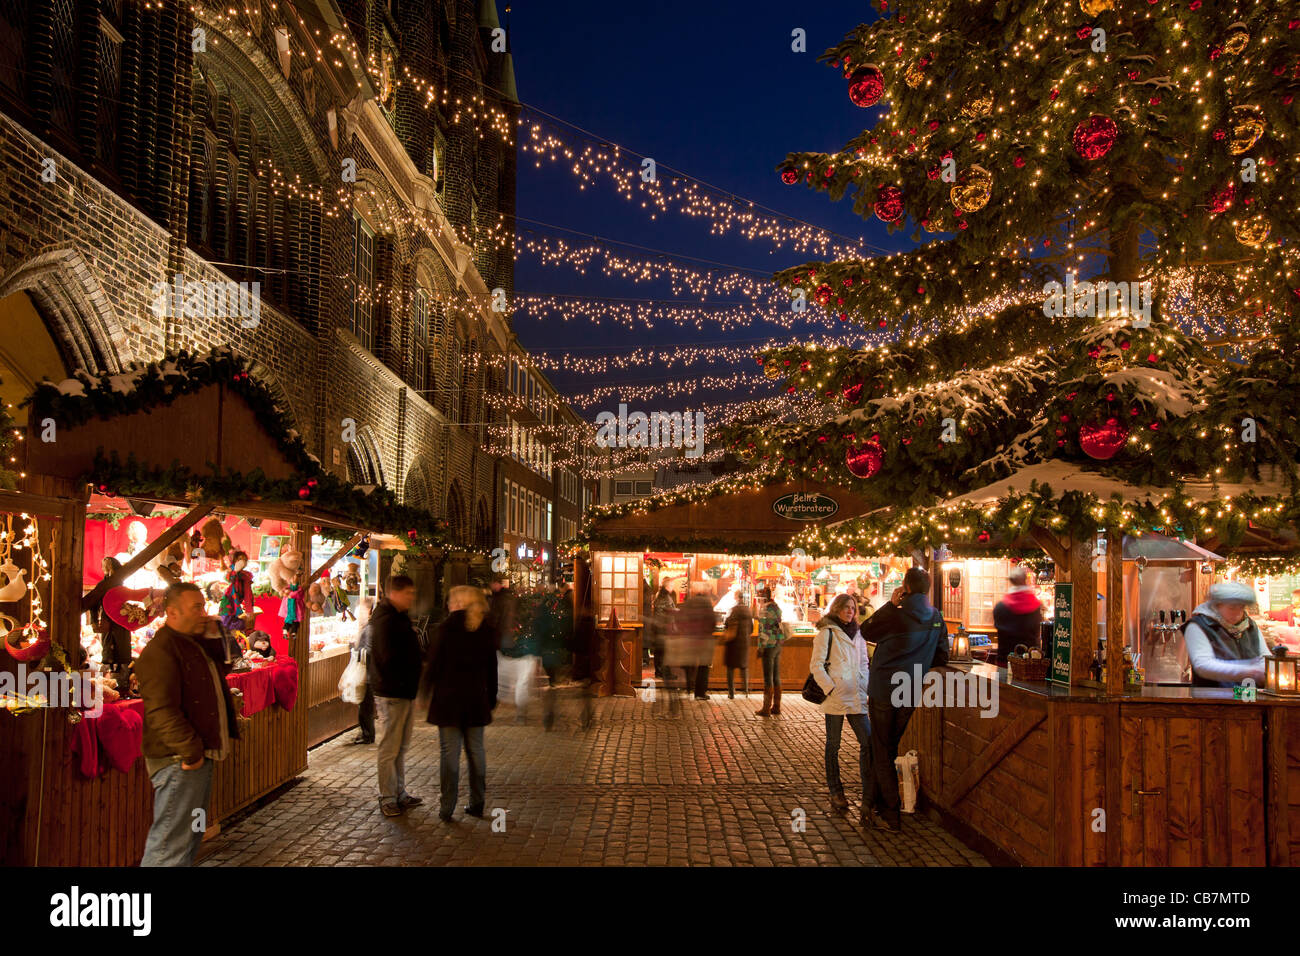 Illuminated booths and stands at Christmas market in the Hanseatic City of Lübeck, Germany Stock Photo